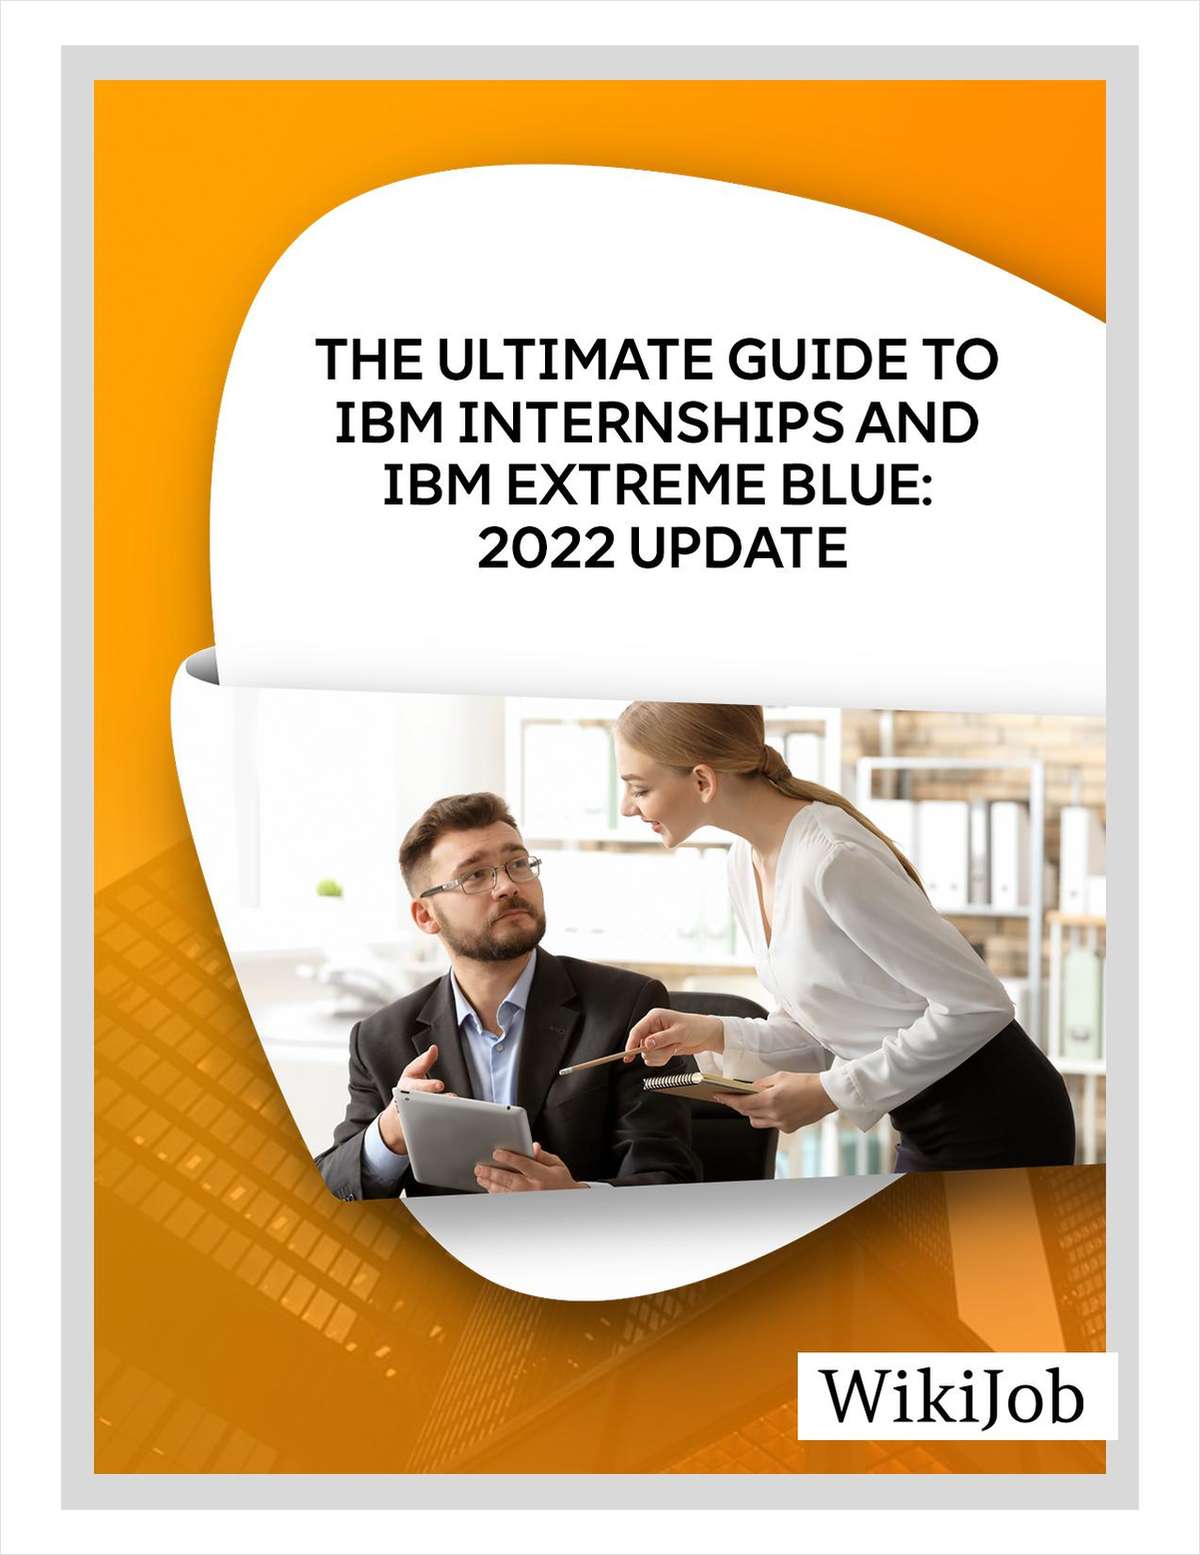 The Ultimate Guide to IBM Internships and IBM Extreme Blue: 2022 Update